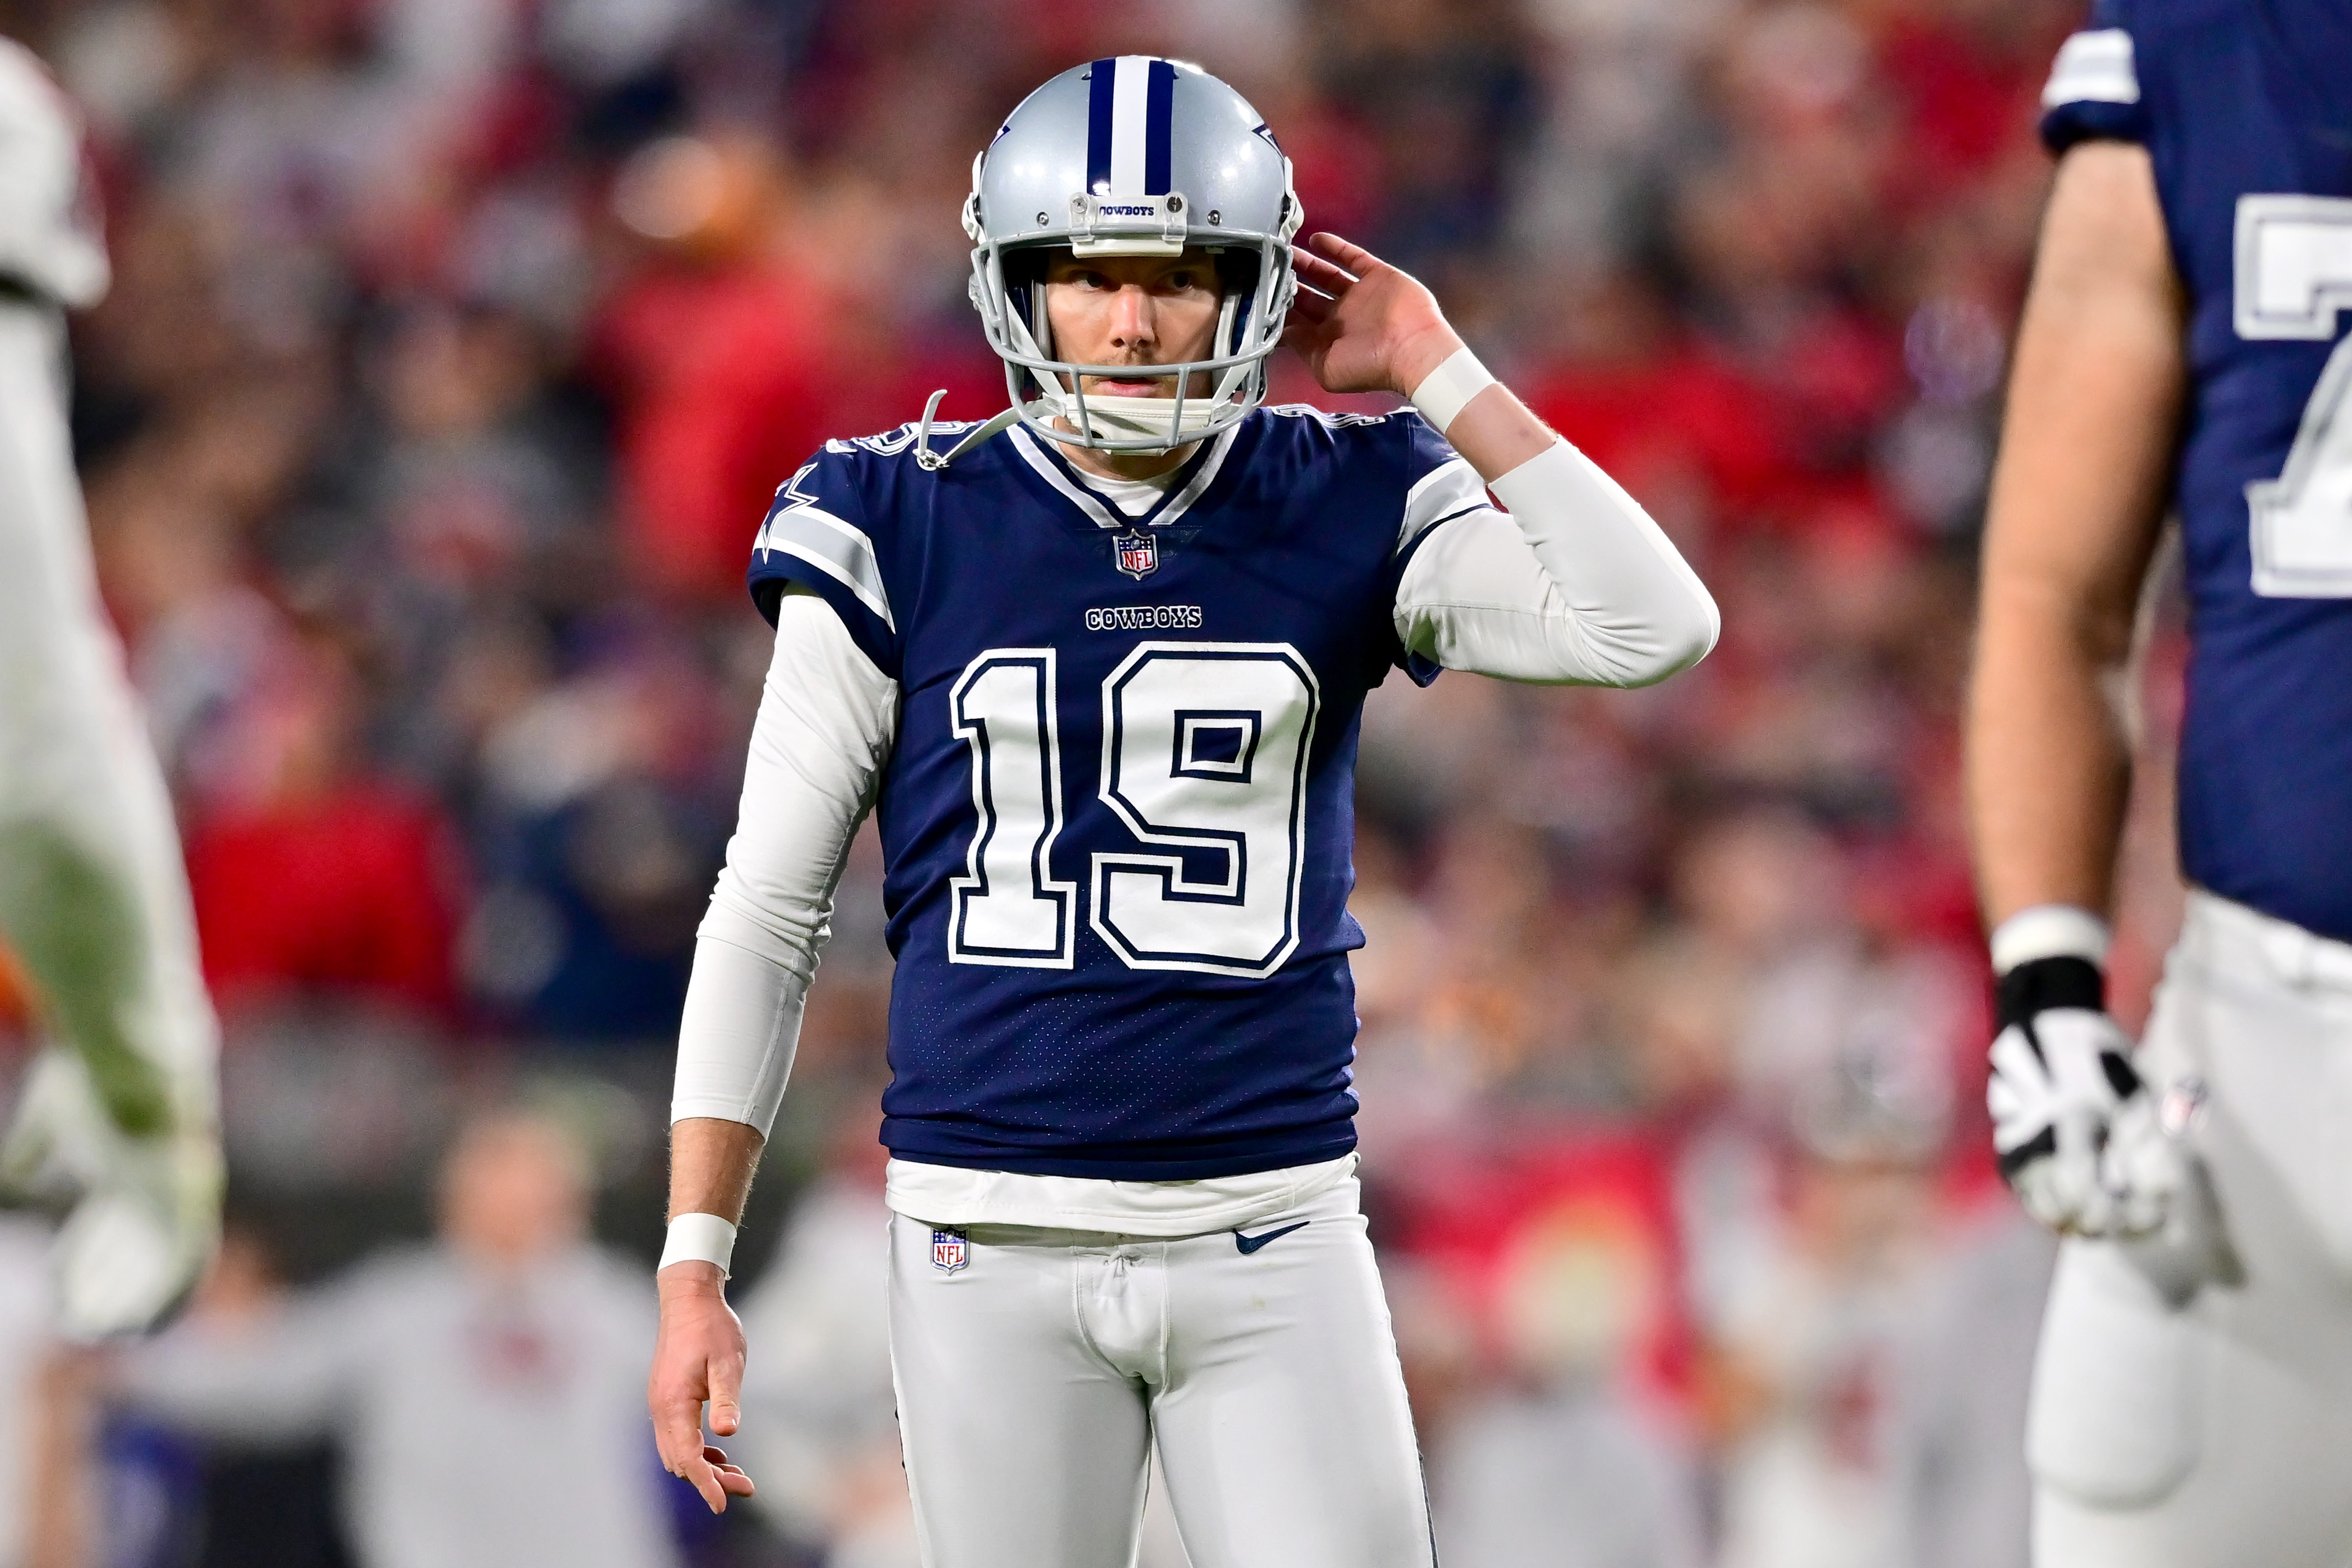 Brett Maher of the Dallas Cowboys reacts after missing an extra point against the Tampa Bay Buccaneers during the third quarter in the NFC Wild Card playoff game at Raymond James Stadium on January 16, 2023 in Tampa, Florida.